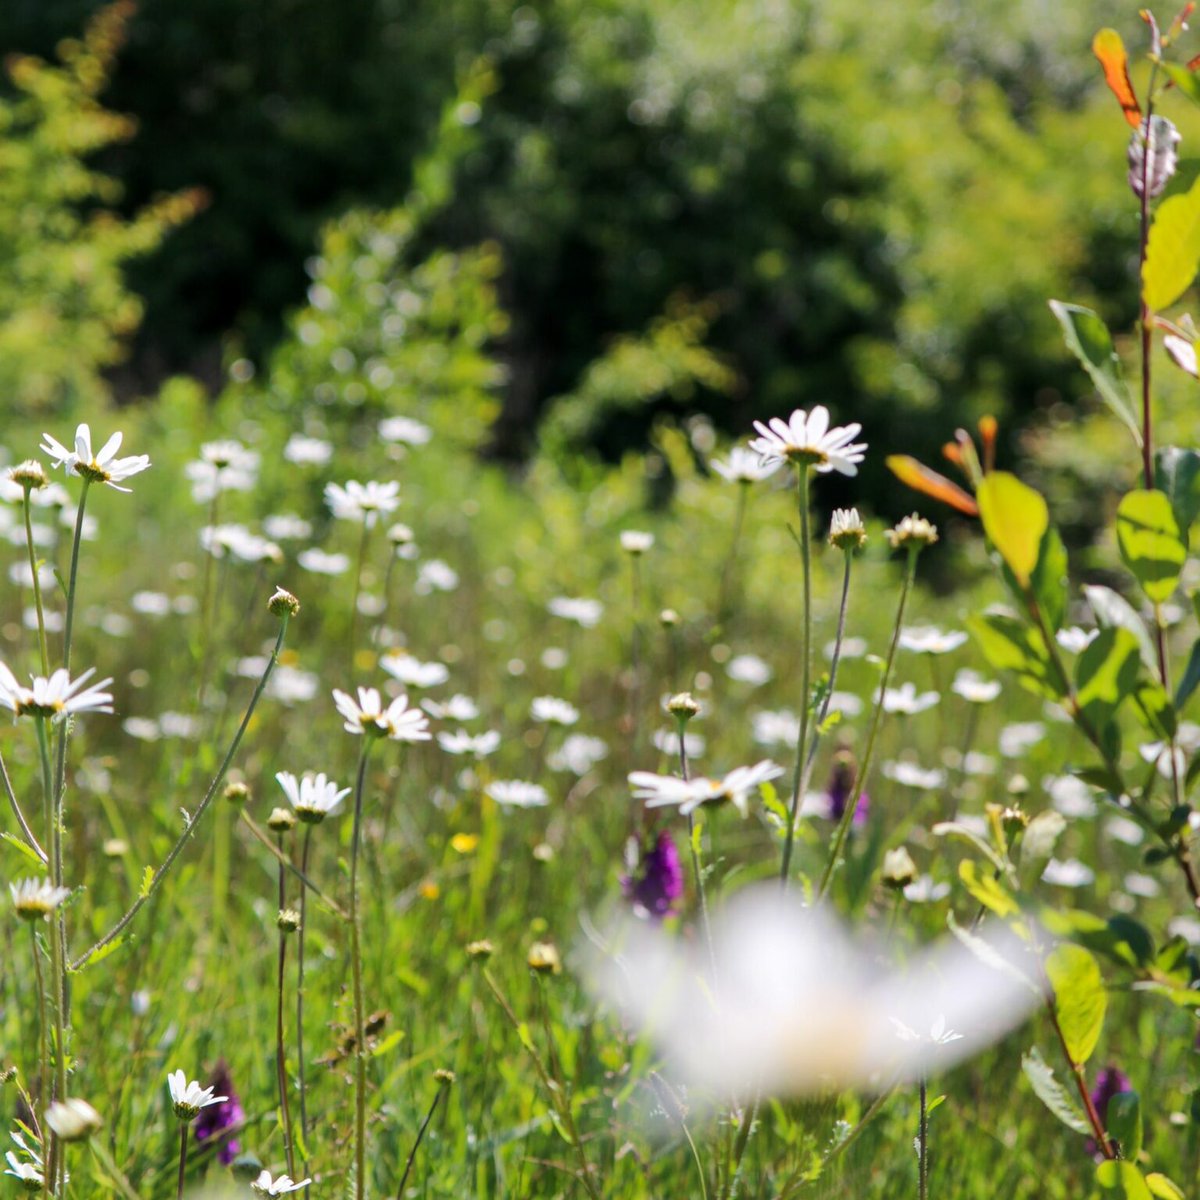 We’ve lost 97% of flower-rich meadows since the 1930’s & with them gone are vital food needed by pollinators. But with @Love_plants's #NoMowMay your lawn can help! A healthy lawn with some long grass &wildflowers benefits wildlife, tackles pollution & can lock carbon below ground